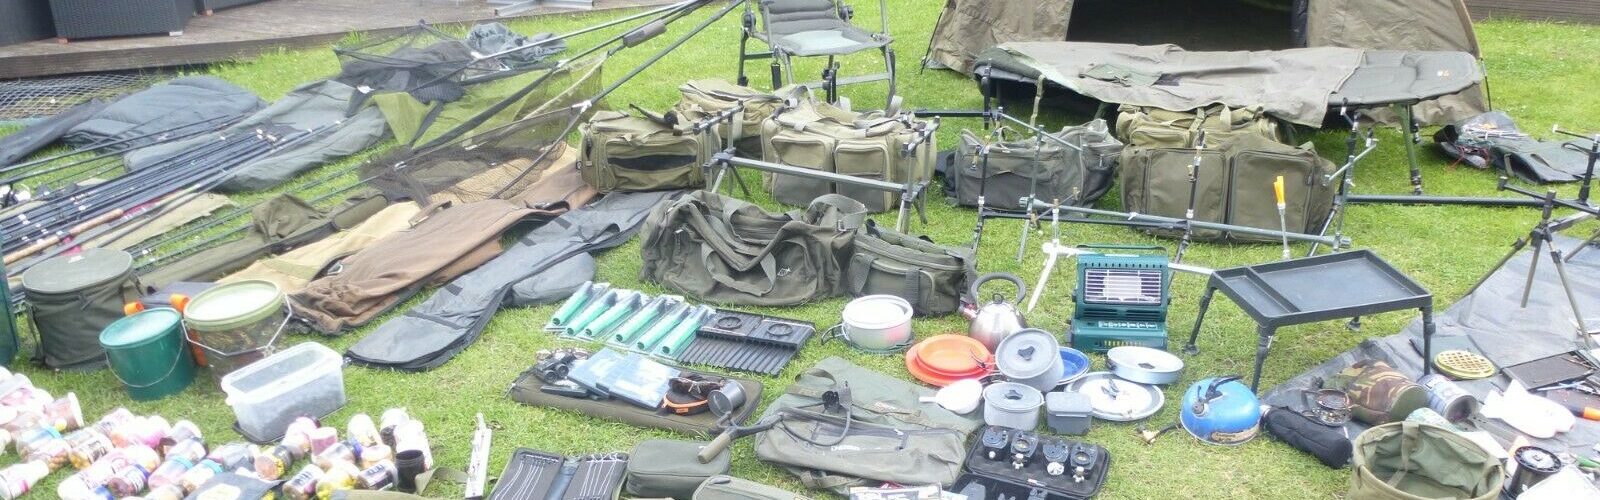 MASSIVE USED CARP FISHING COLLECTION FOR SALE - Anglers' Net